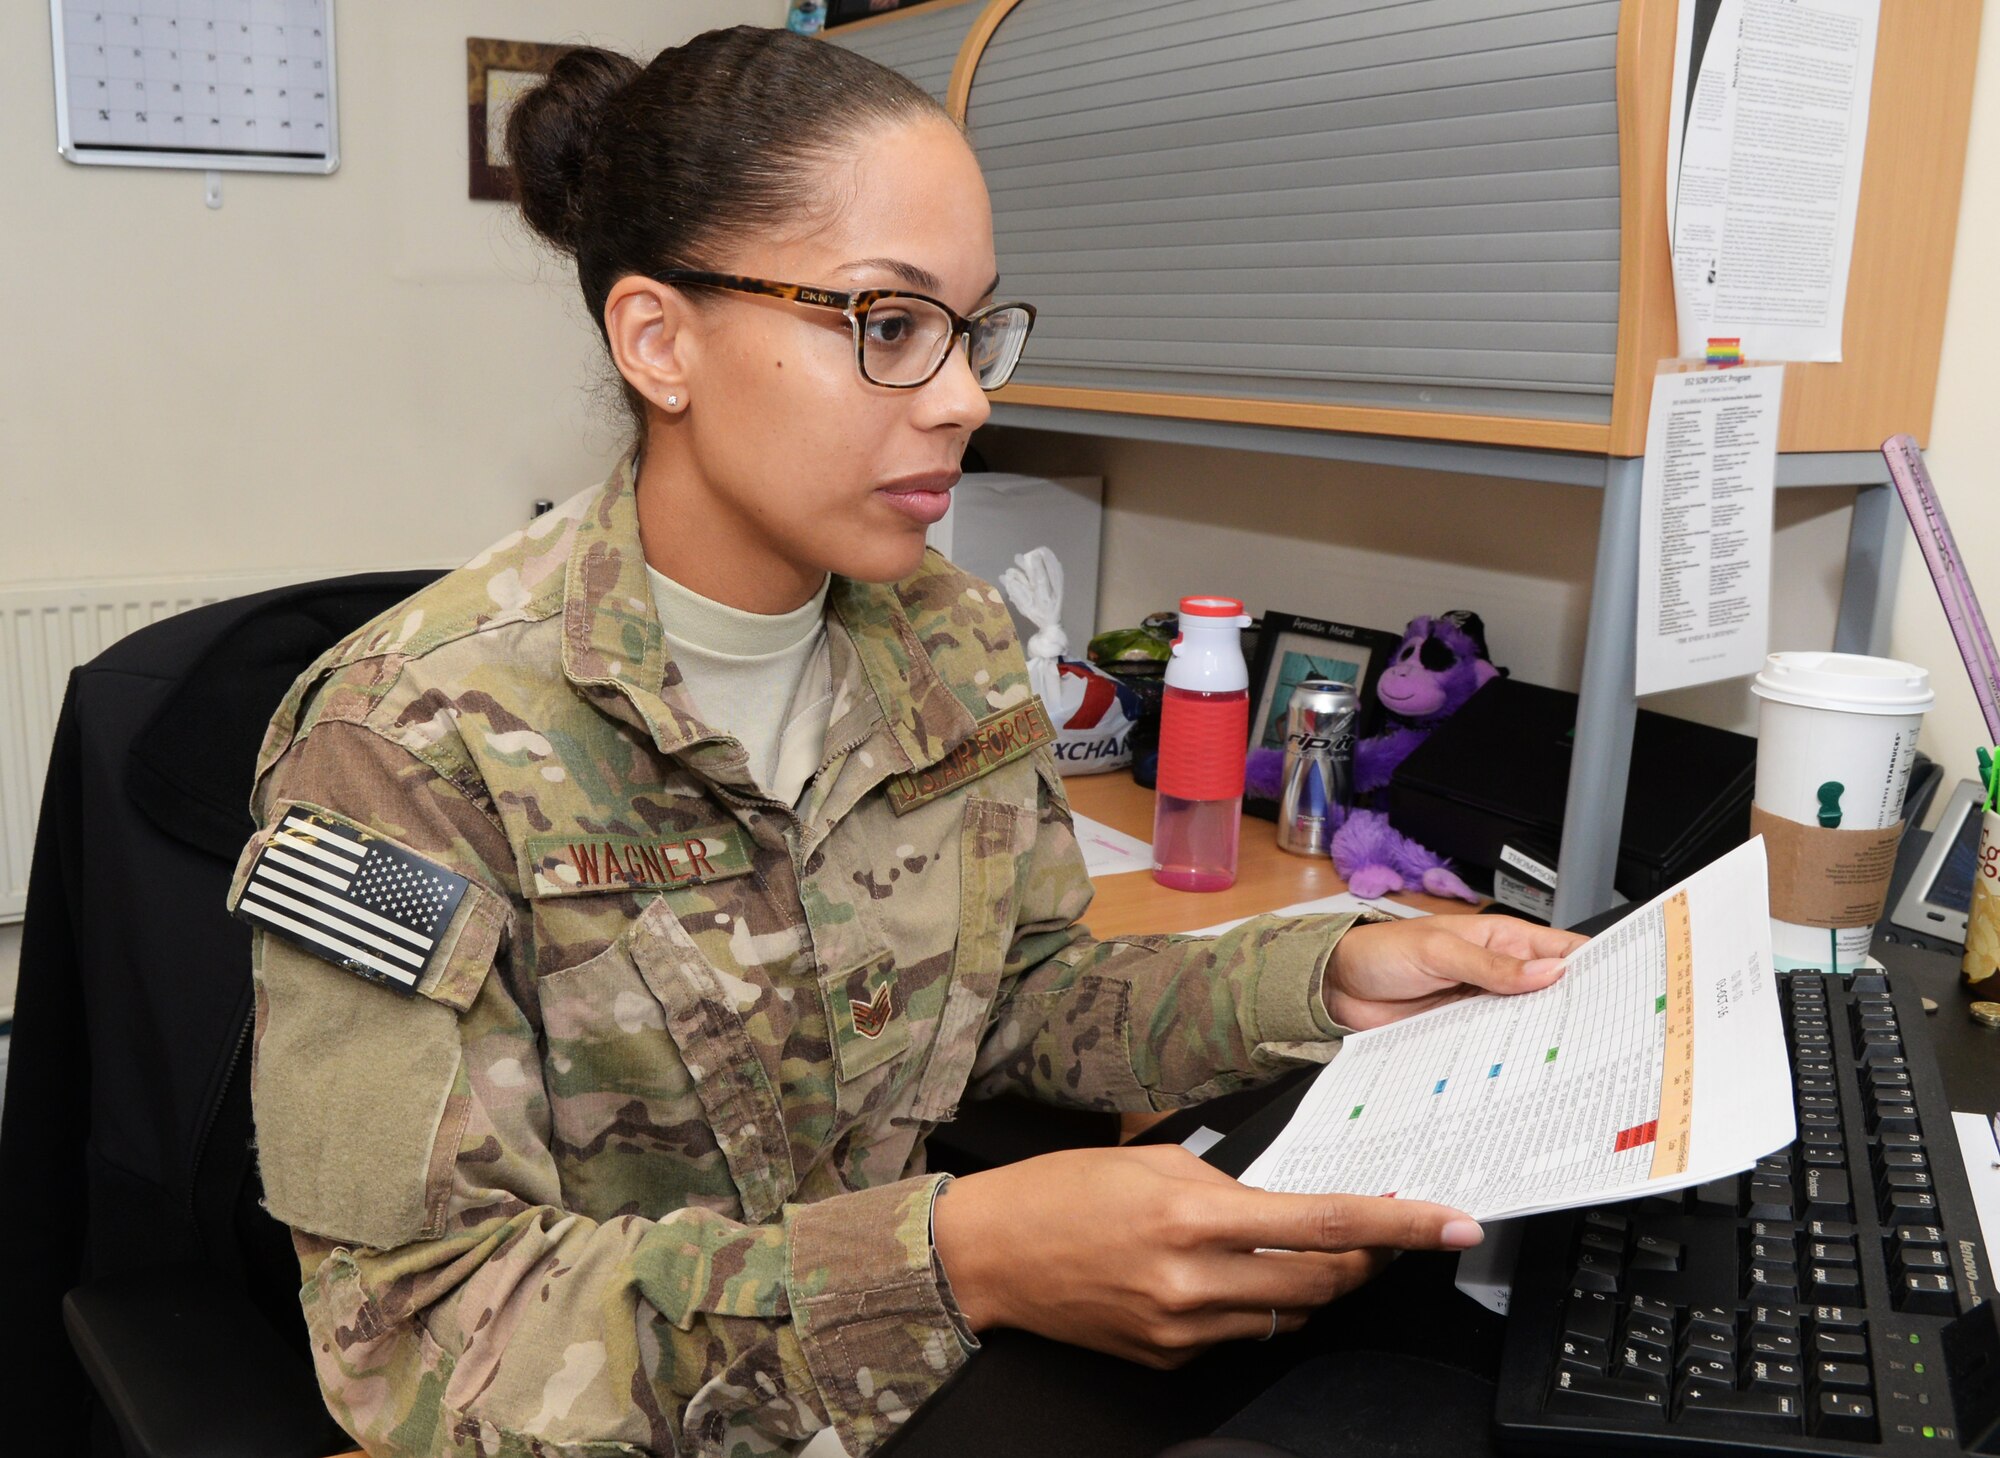 U.S. Air Force Staff Sgt. Lauren Wagner, 7th Special Operations Squadron NCO in charge of aviation resource management, works at her computer Oct. 6, 2016, on RAF Mildenhall, England. Wagner was submitted for the Square-D-Spotlight for being an outstanding member of Team Mildenhall. (U.S. Air Force photo by Airman 1st Class Tenley Long) 